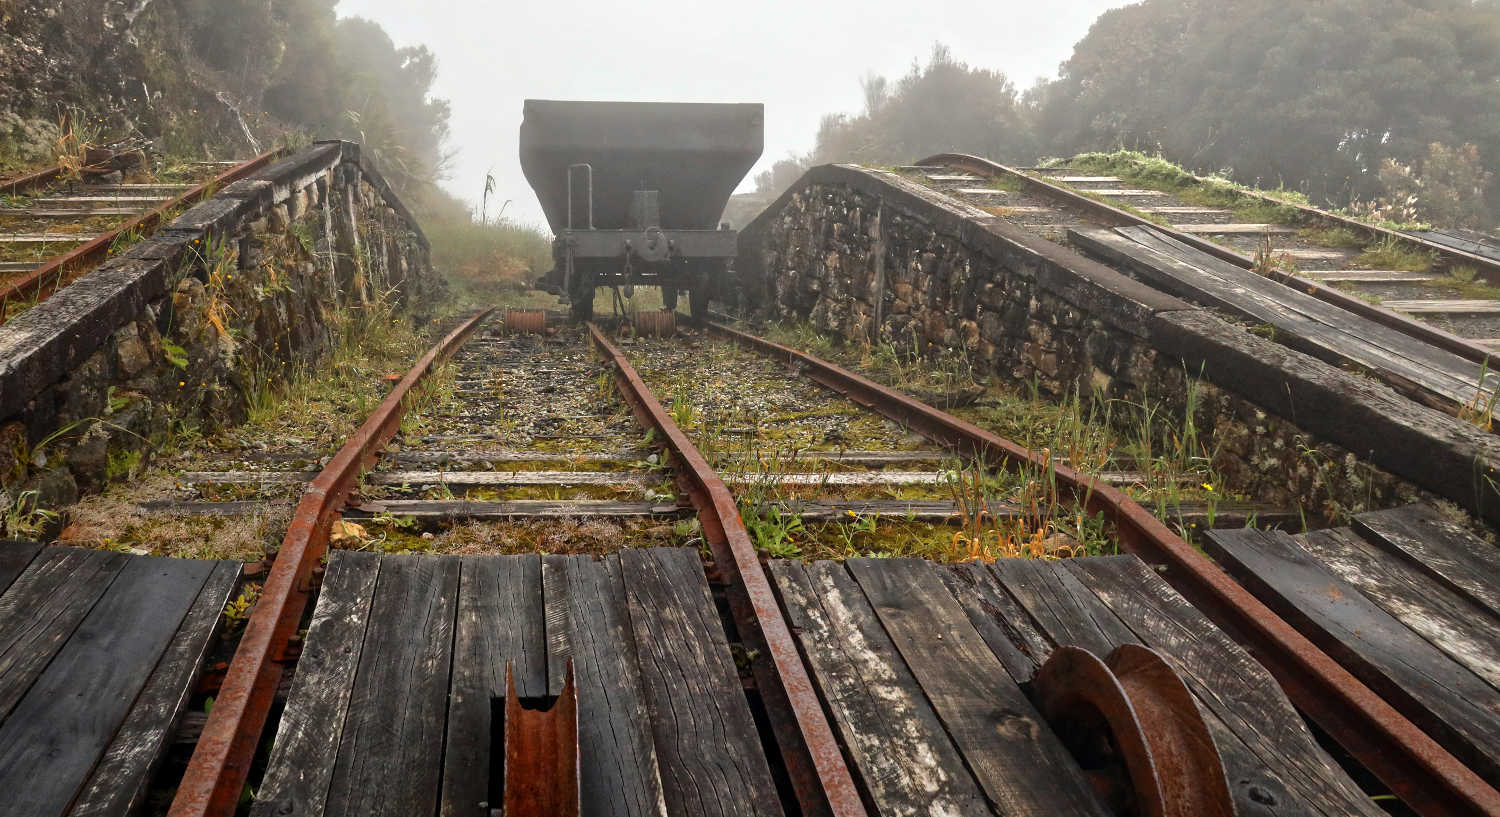 Denniston incline with coal bucket and misty conditions, West Coast, NZ